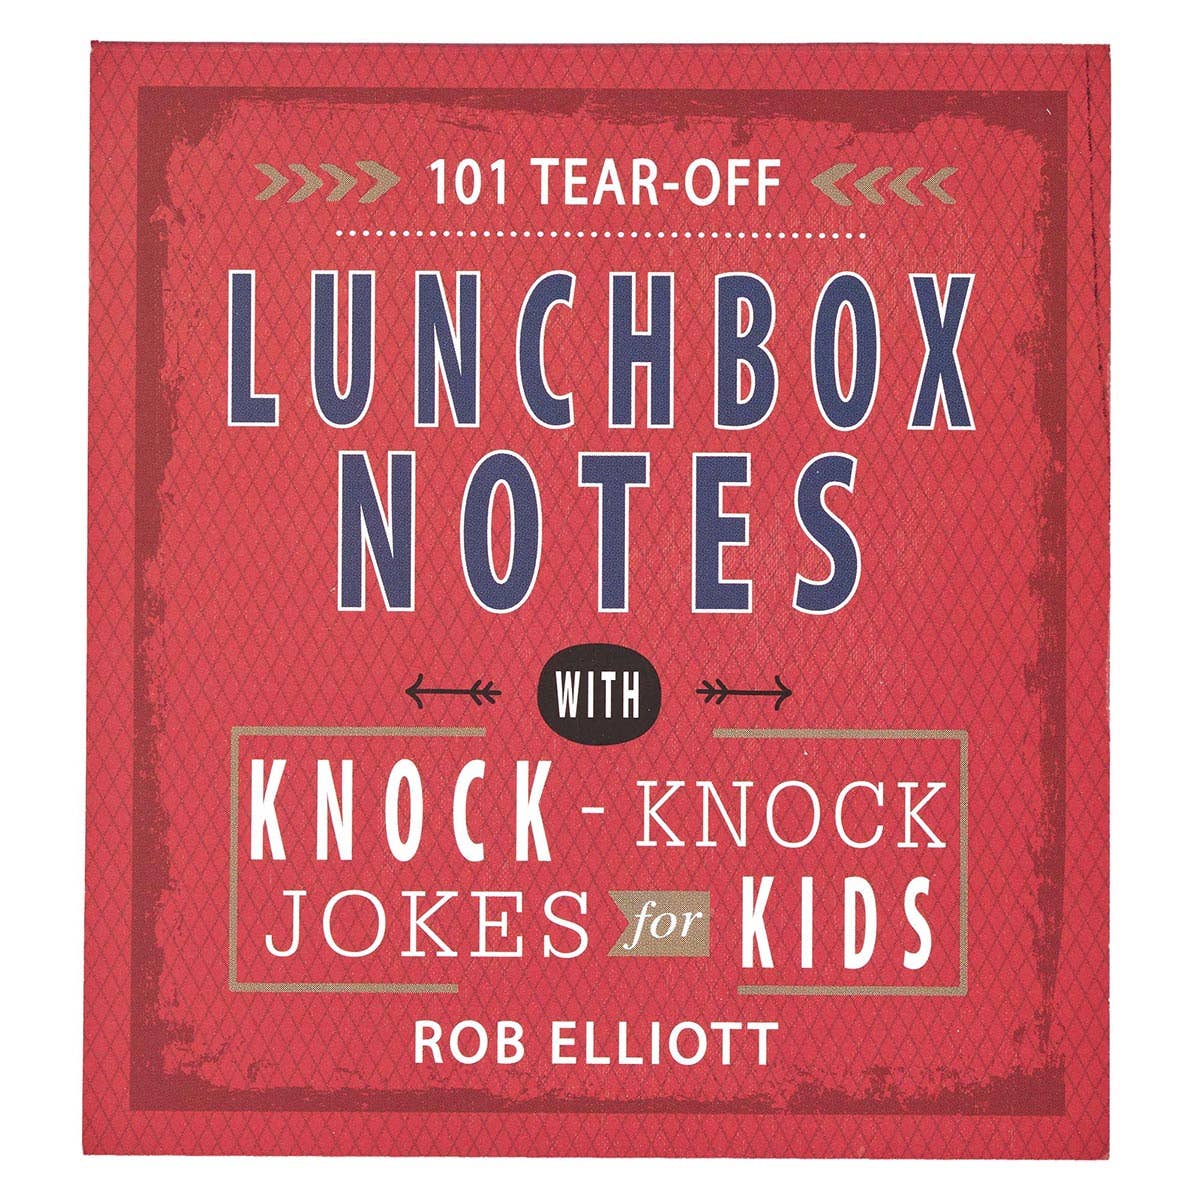 Christian Art Gifts - 101 Lunchbox Notes with Knock-Knock Jokes for Kids - An Initial Impression